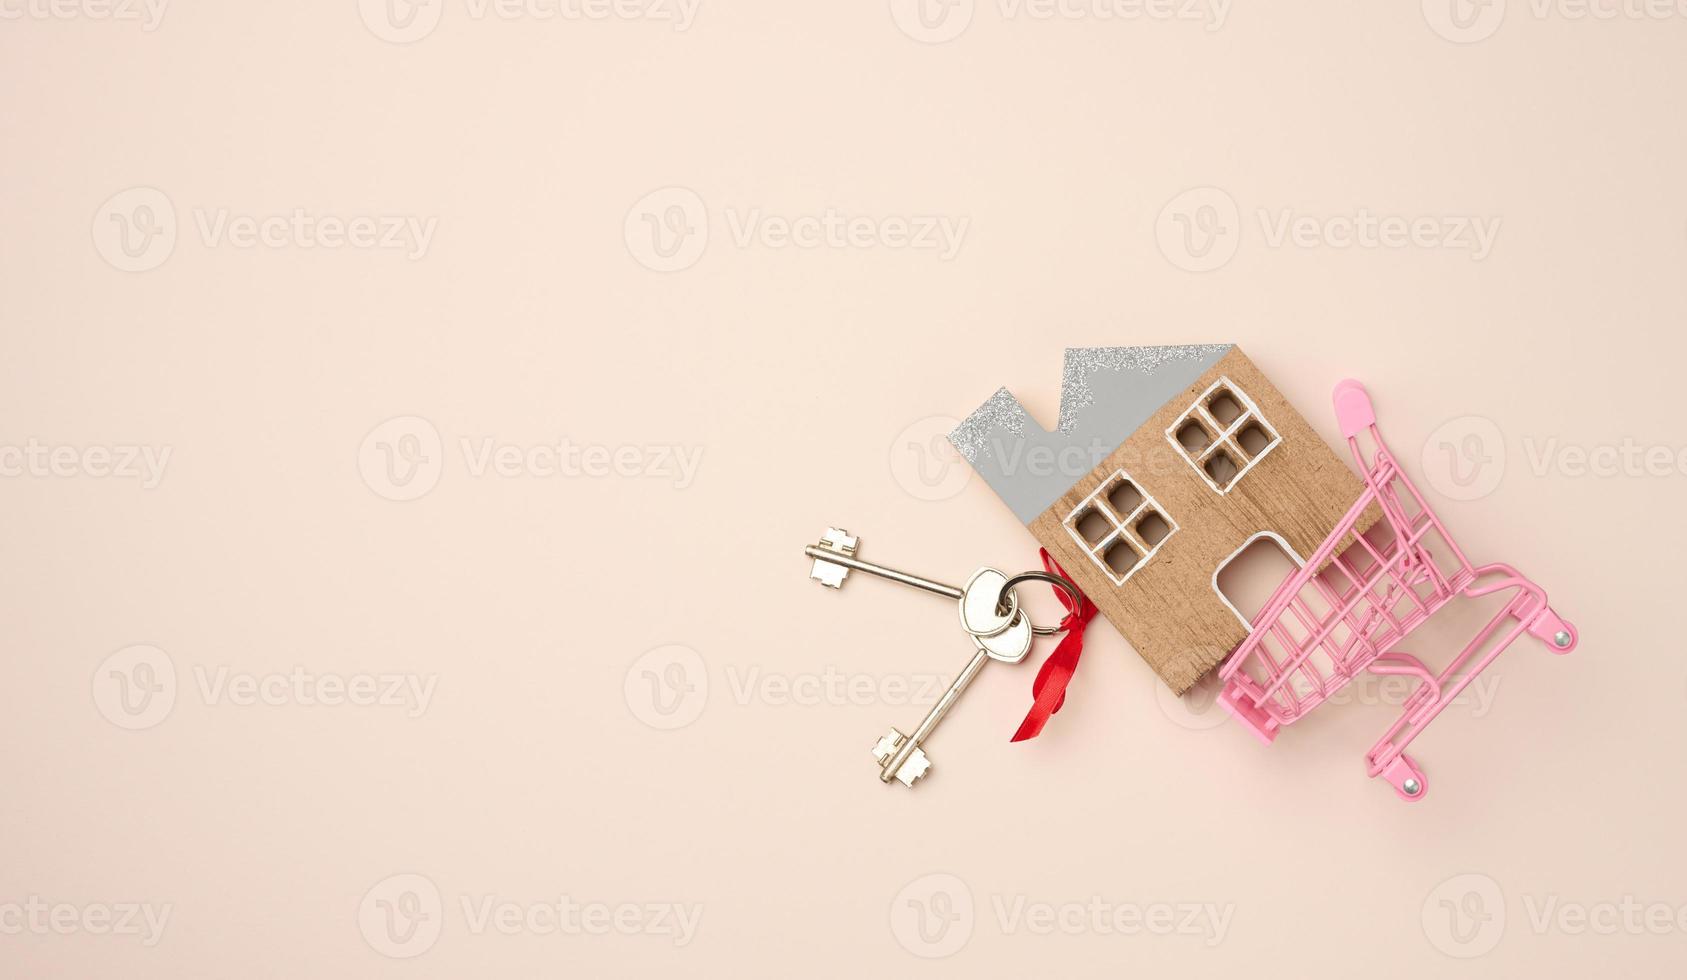 model of a wooden house, a miniature shopping cart on on a beige background. Real estate purchase photo